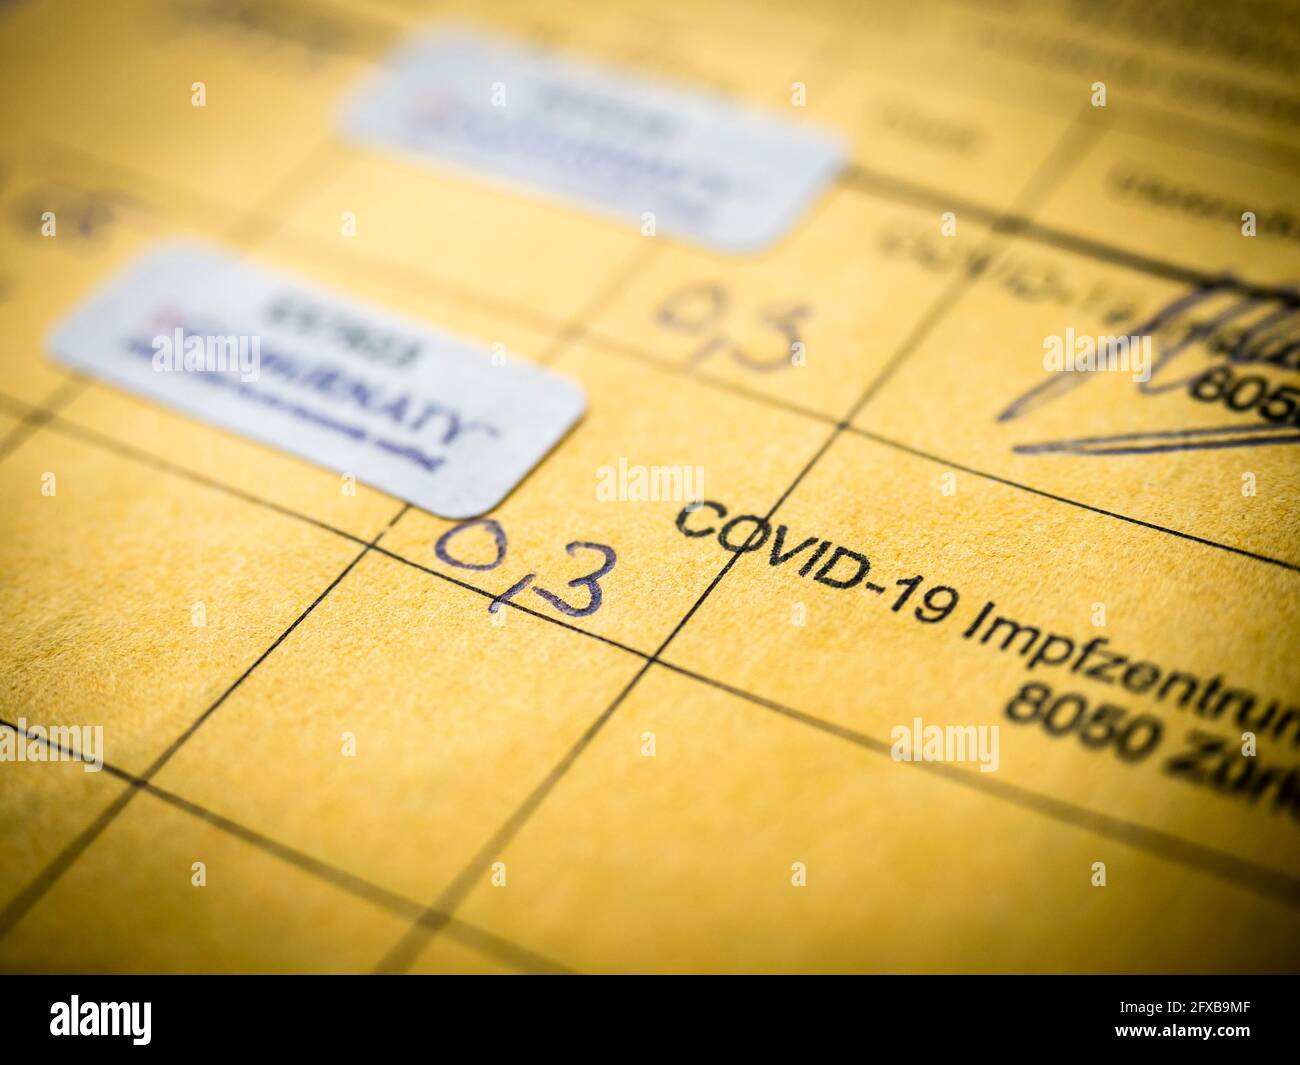 Zurich, Switzerland - 22 May 2021: Close-up of confirmation of two COVID-19 vaccinations in an International Certificate of Vaccination, also known as Carte Jaune or Yellow Card. Stock Photo